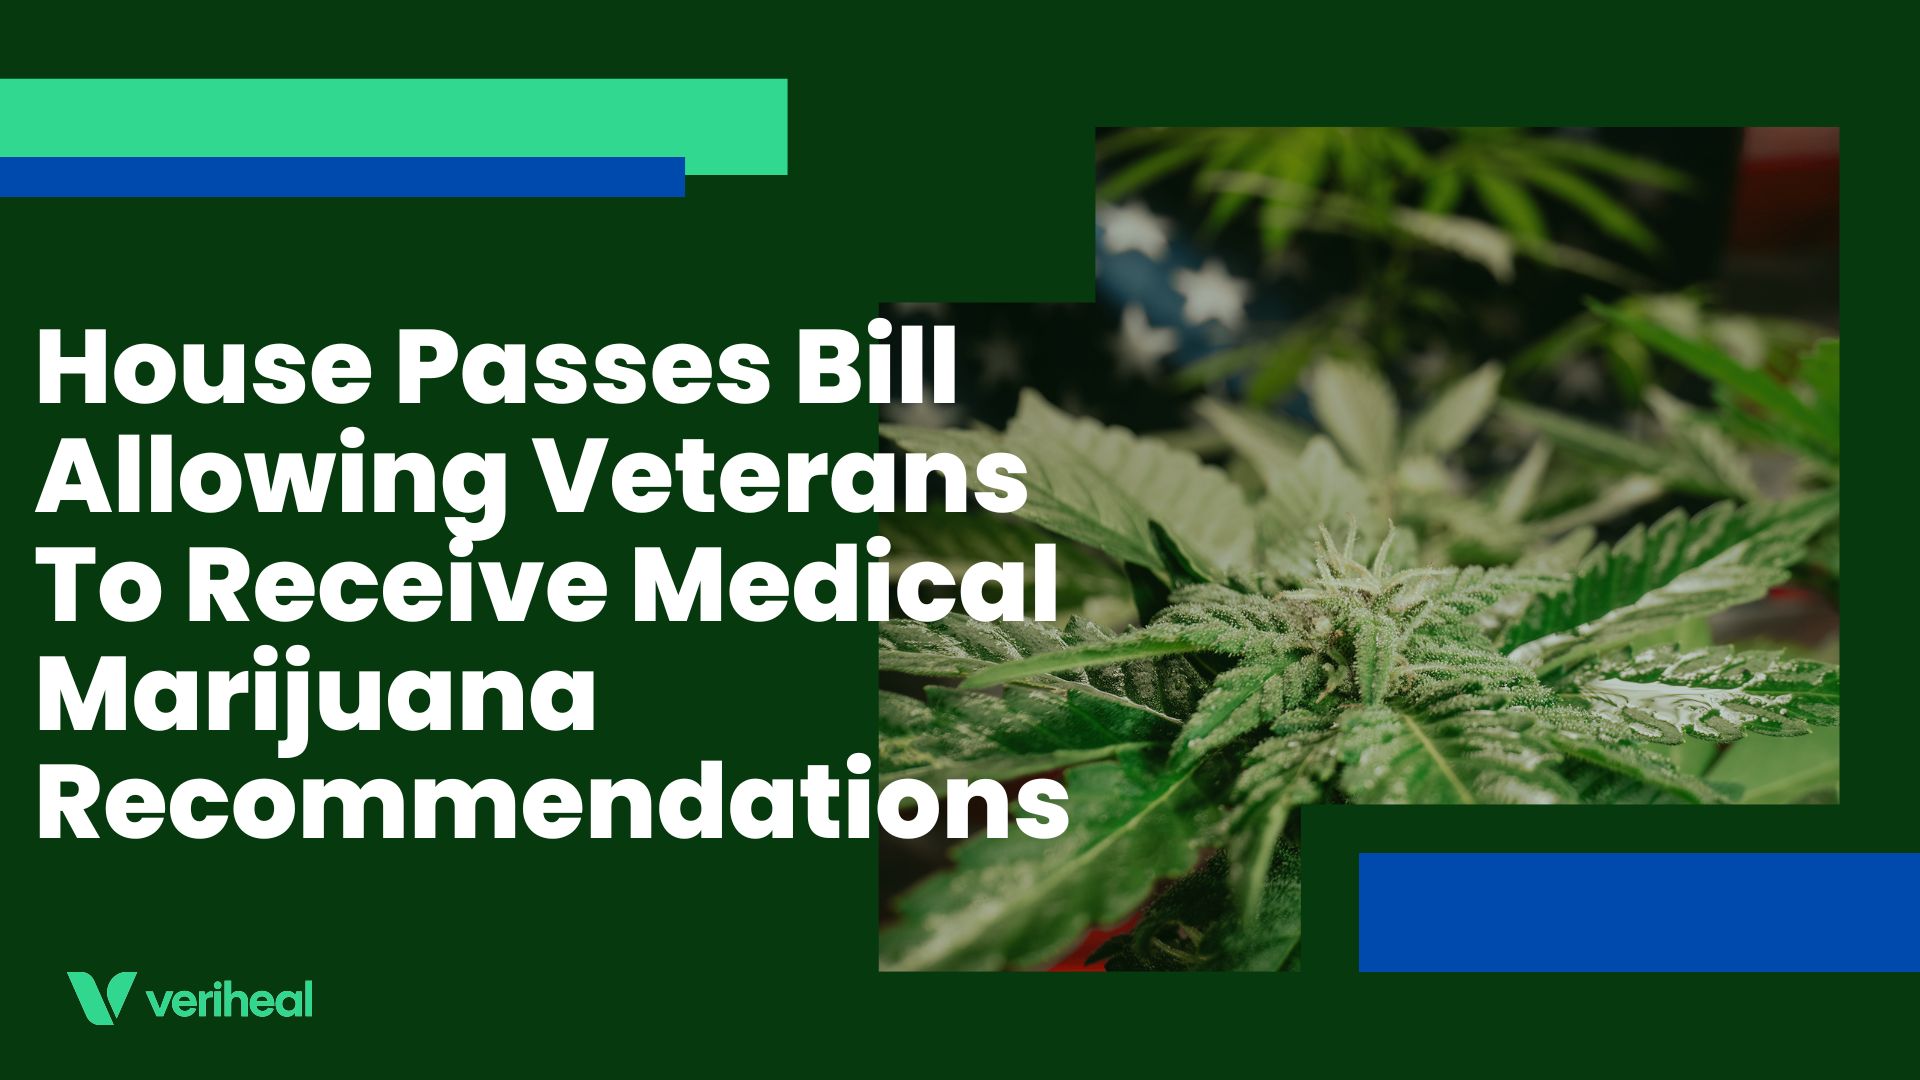 House Passes Bill Allowing Veterans To Receive Medical Marijuana Recommendations